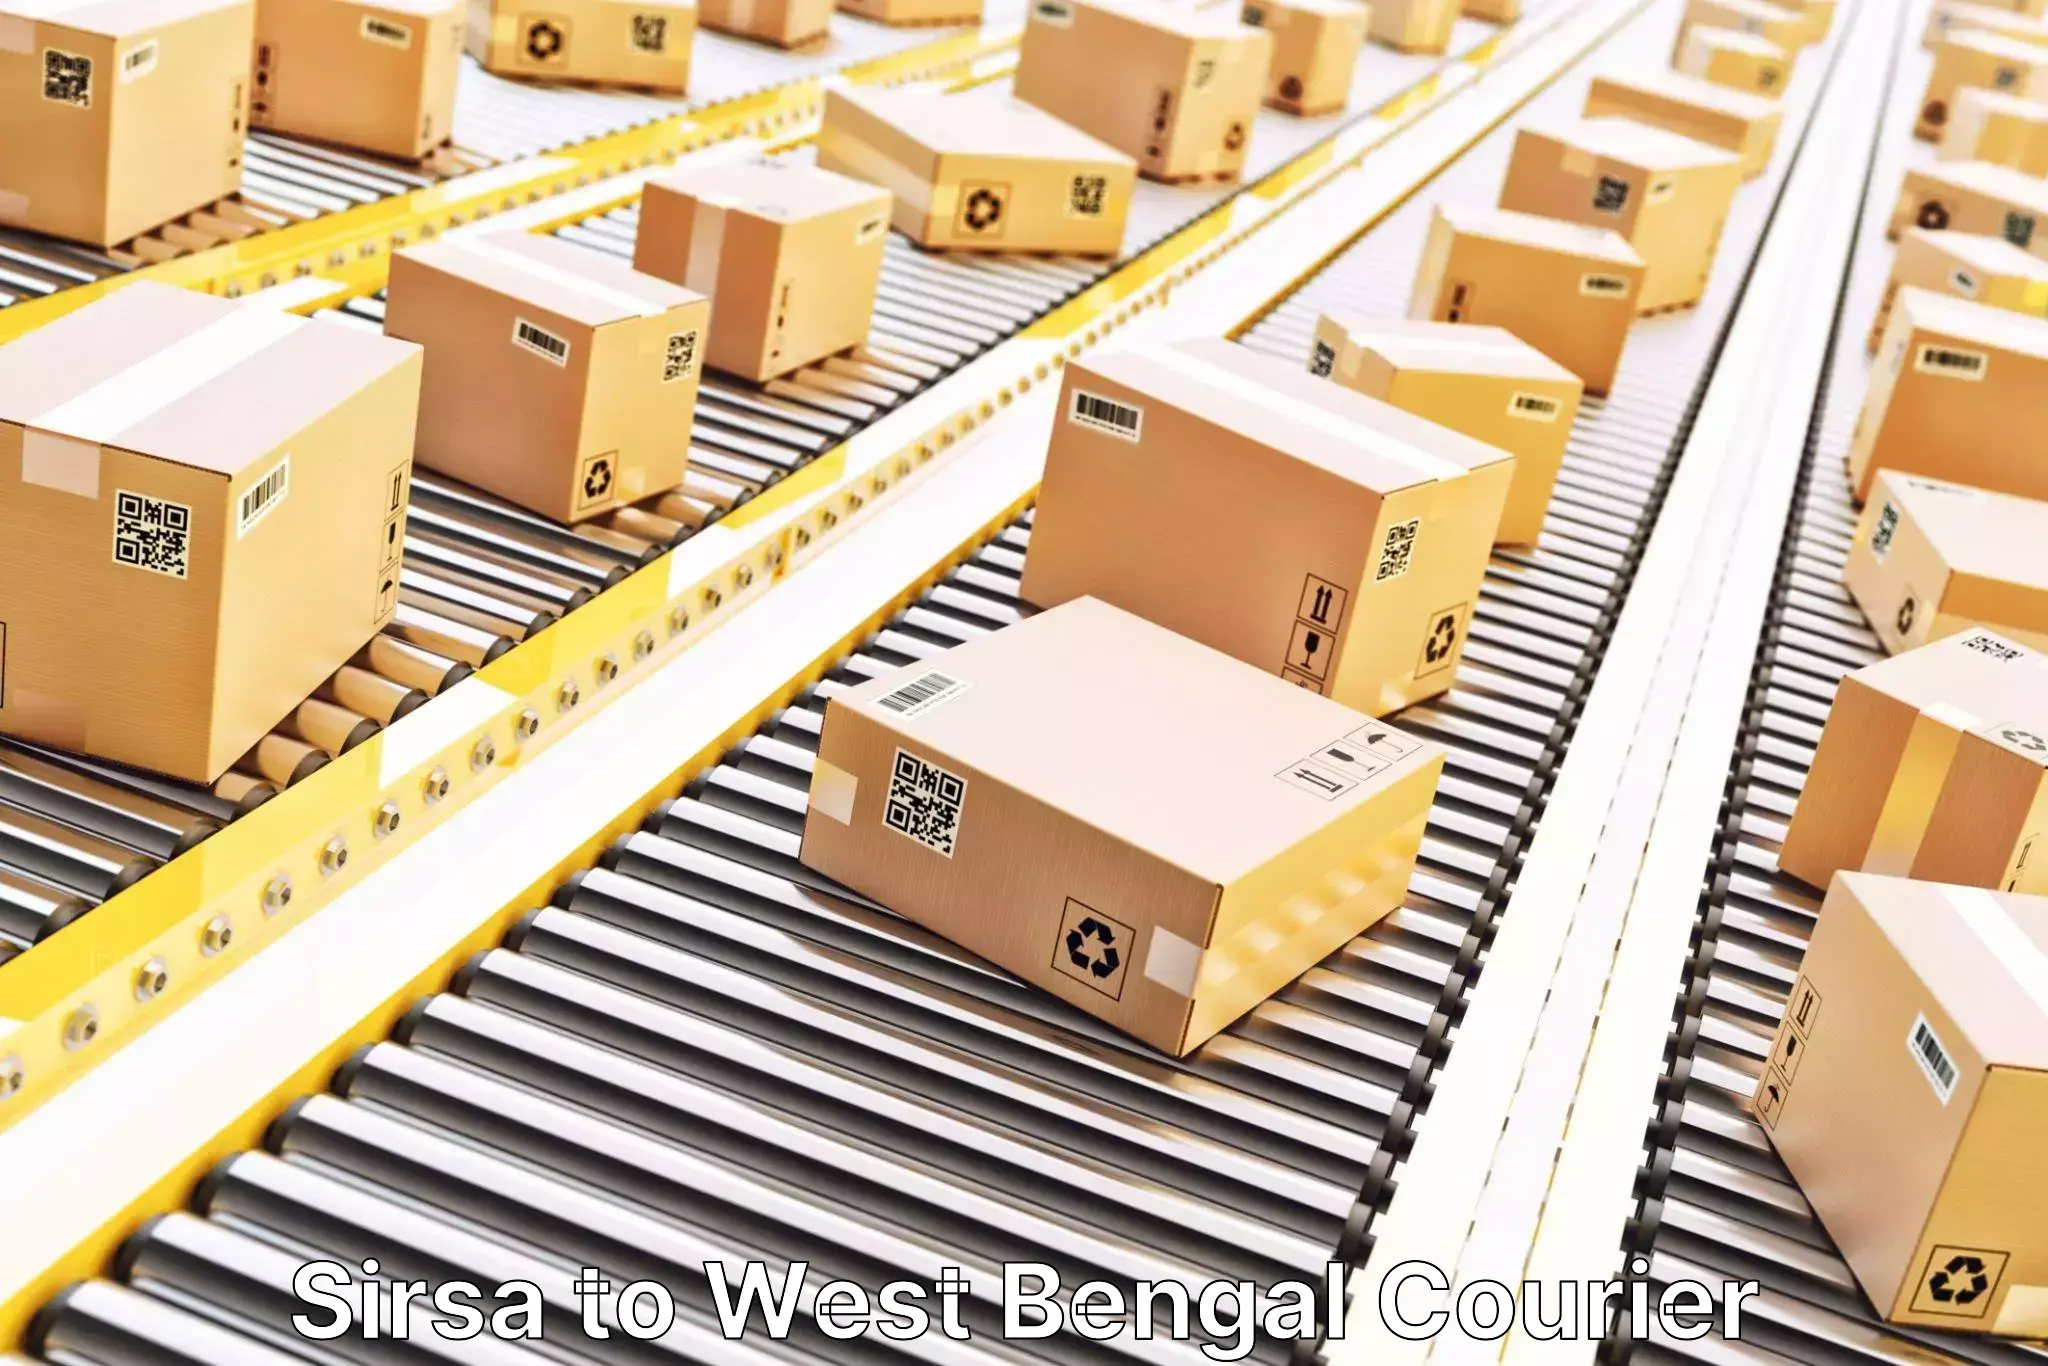 Secure shipping methods Sirsa to West Bengal